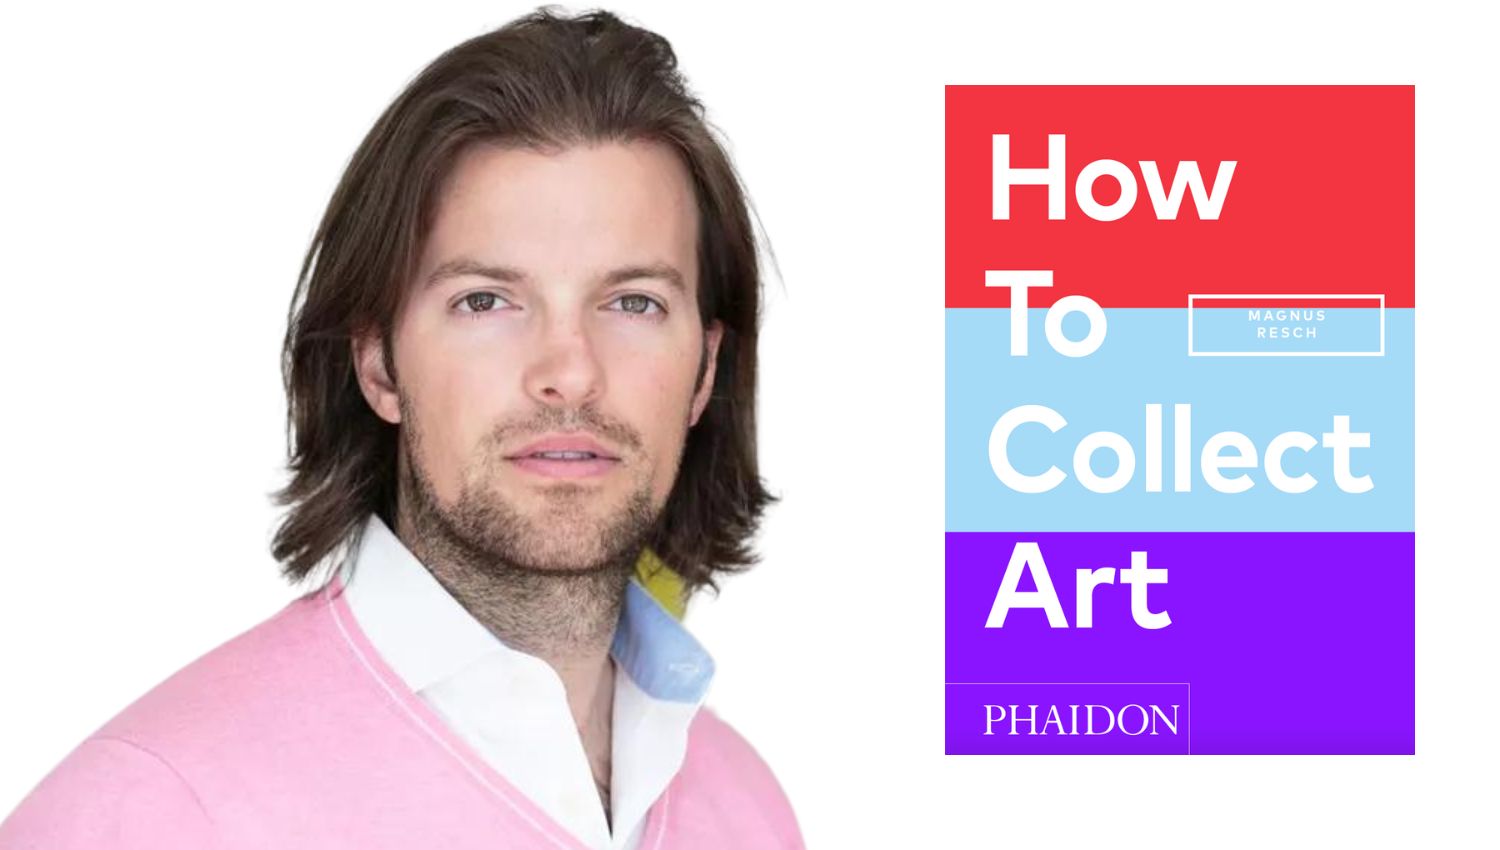 HOW TO COLLECT ART